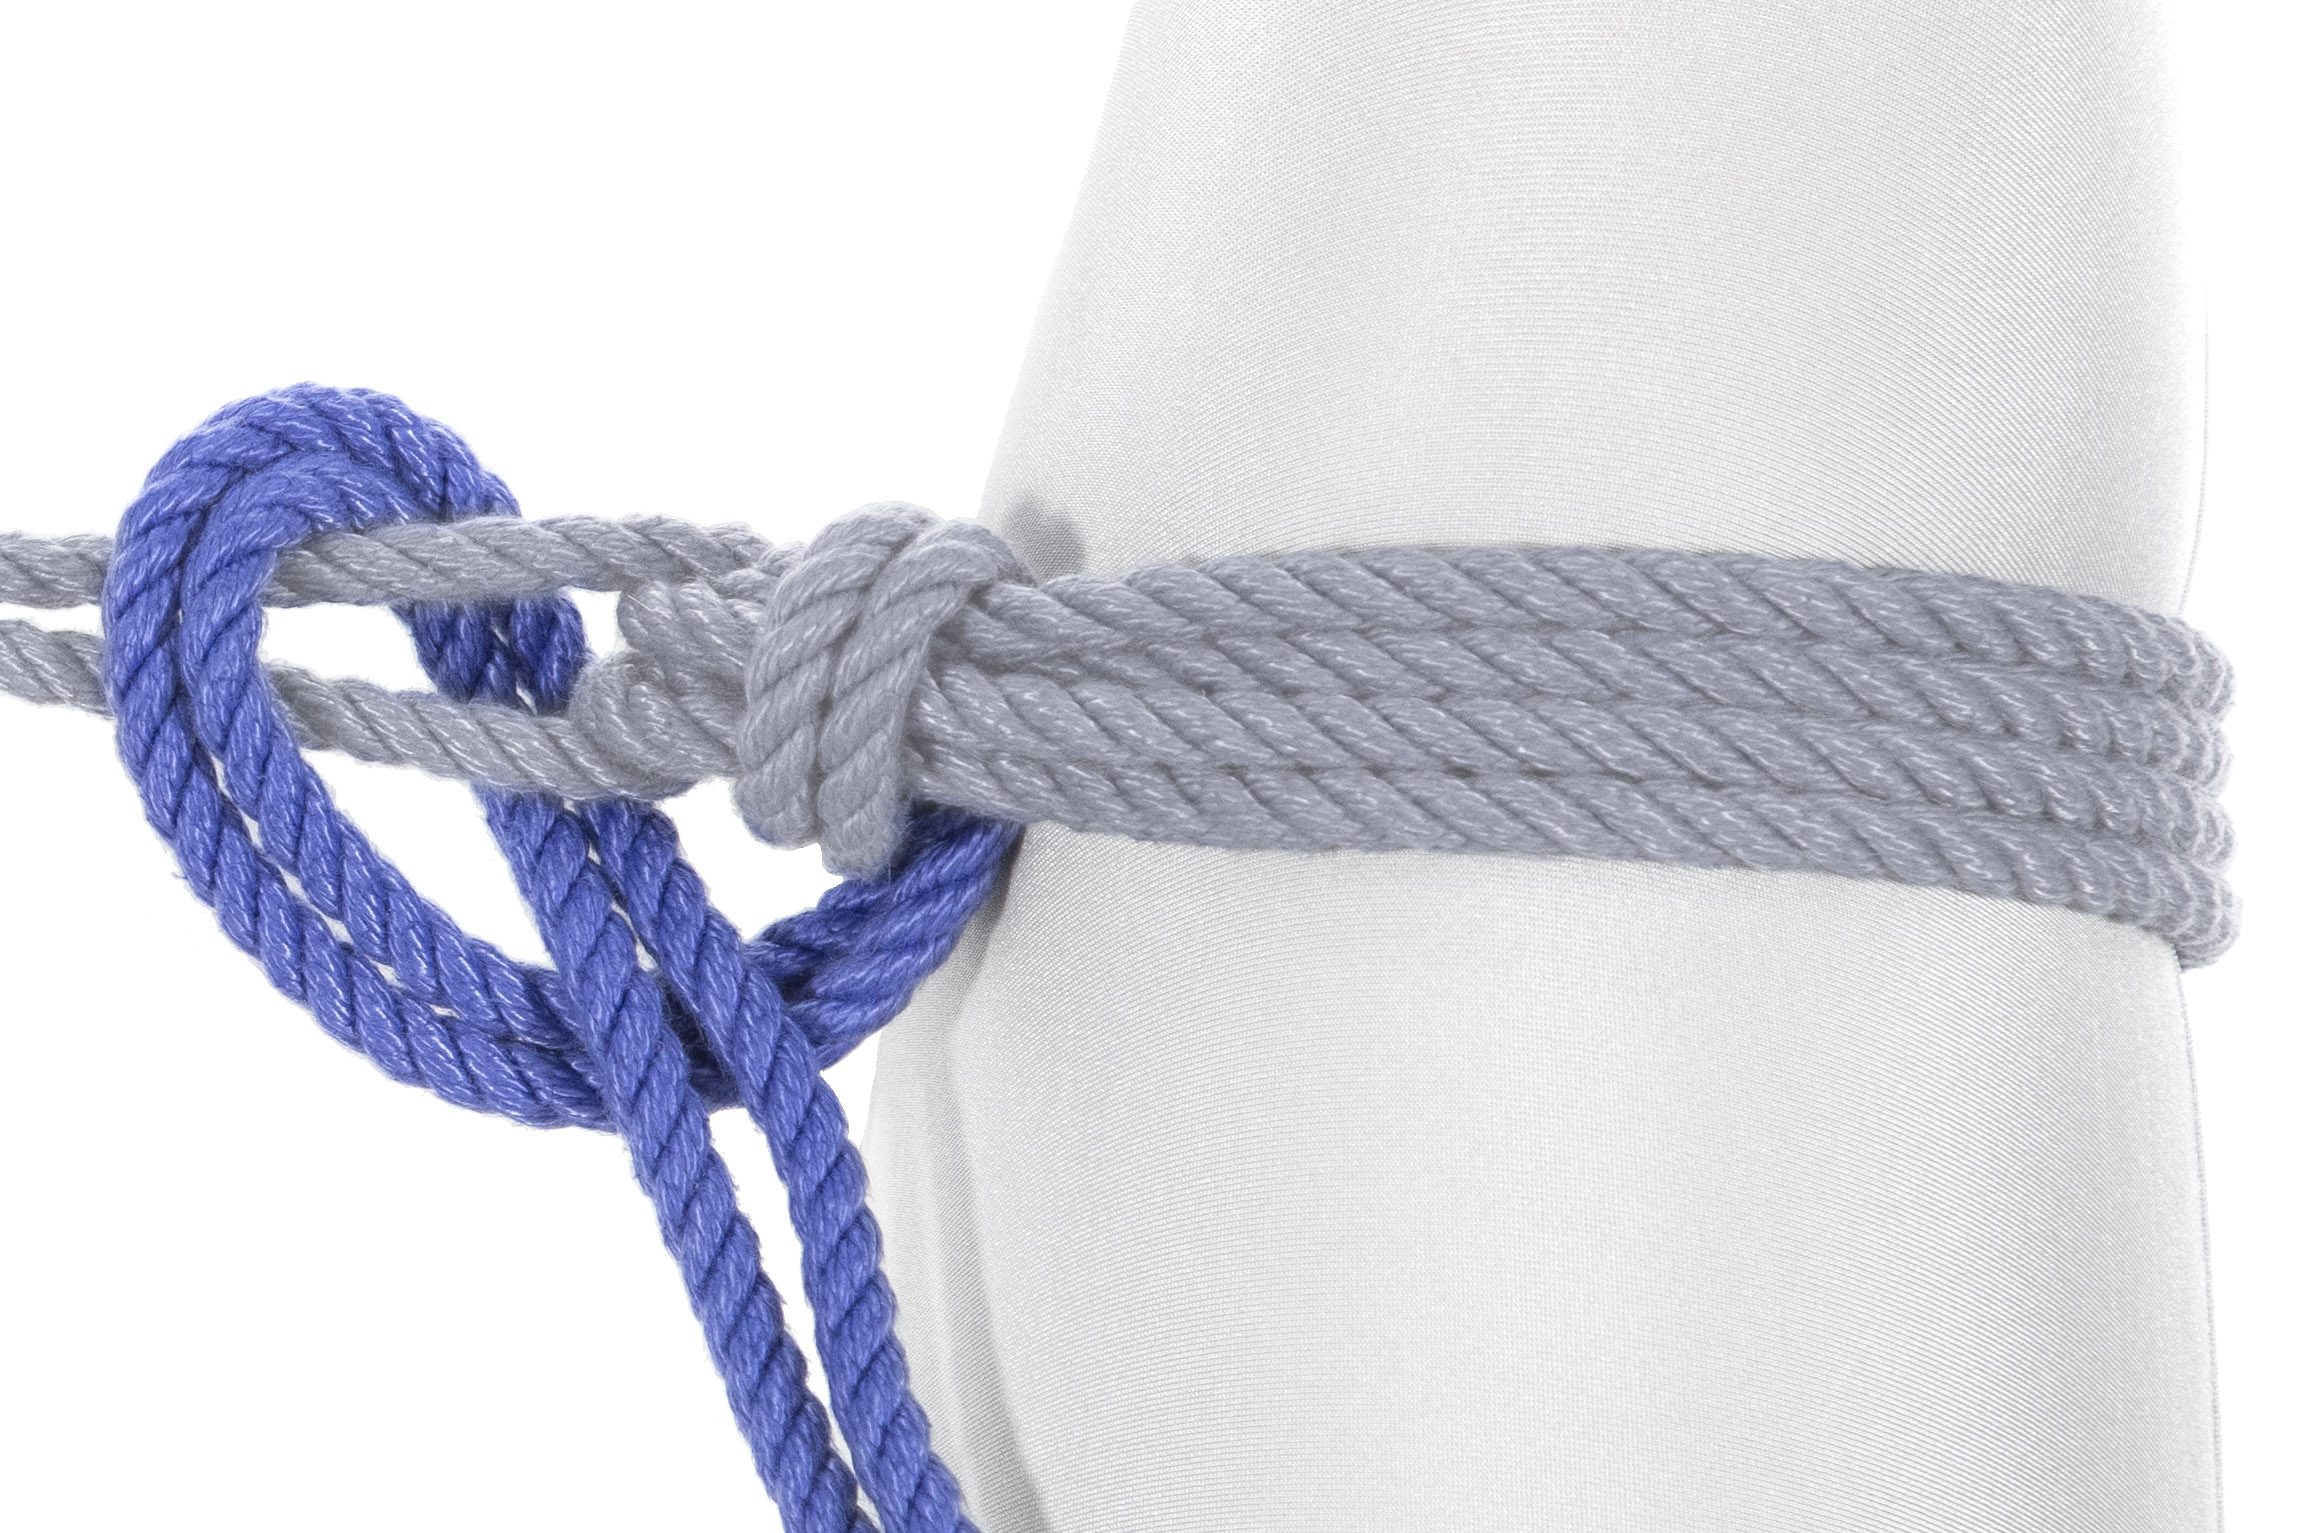 Close-up view of tying a hojo cuff around a limb. The rope has been grayed out where it goes around the limb but is blue where it makes a half hitch around itself.